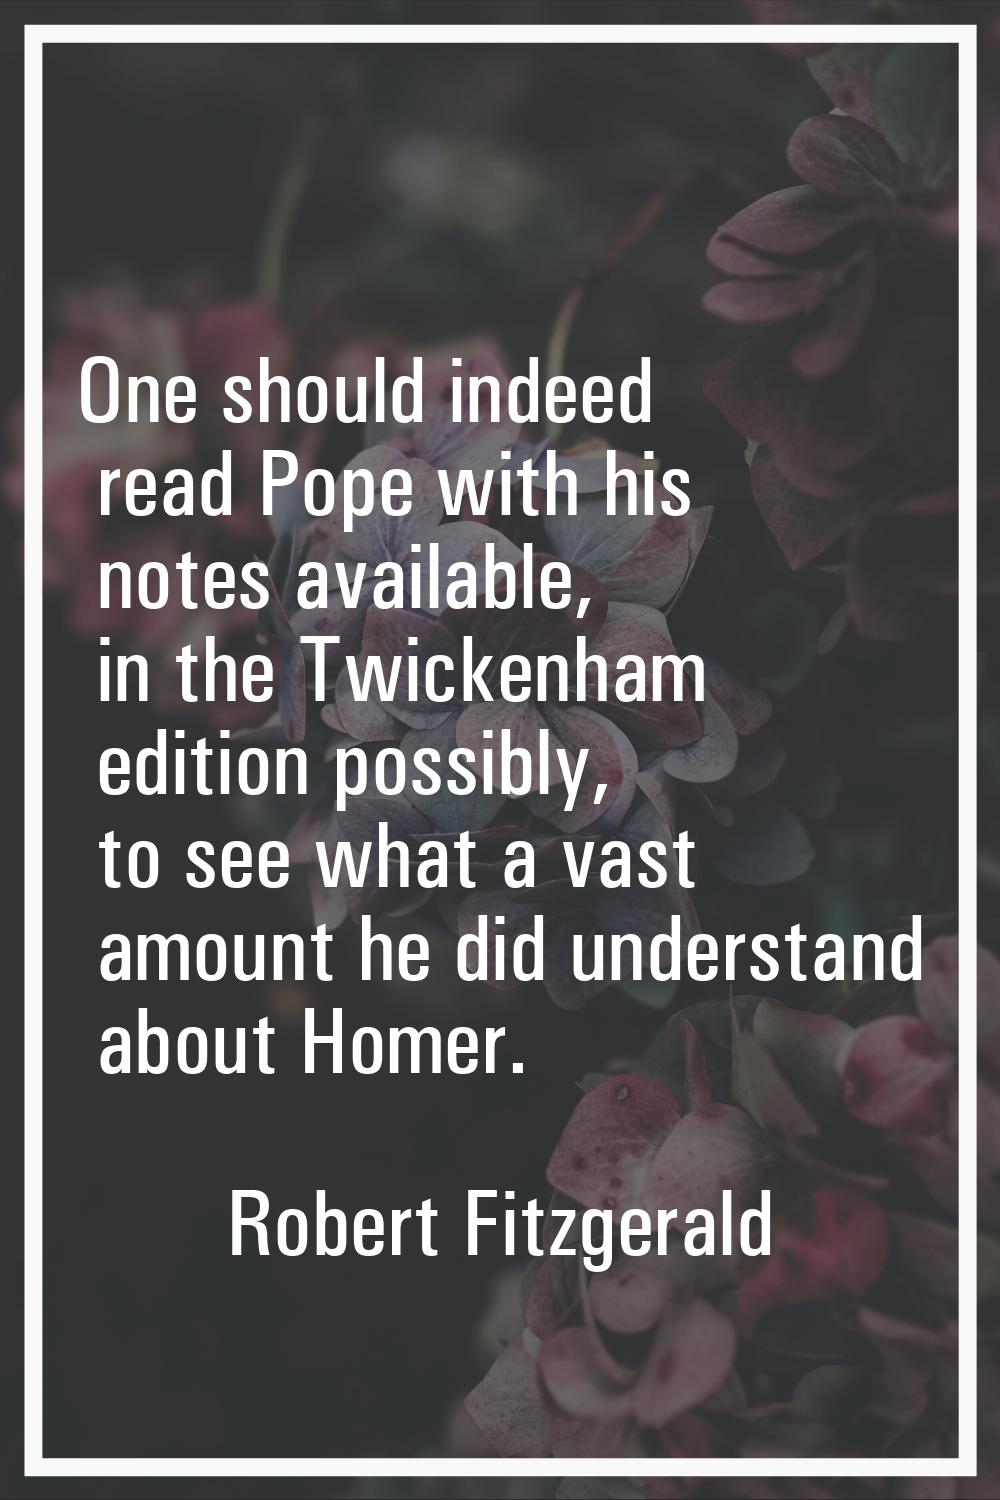 One should indeed read Pope with his notes available, in the Twickenham edition possibly, to see wh